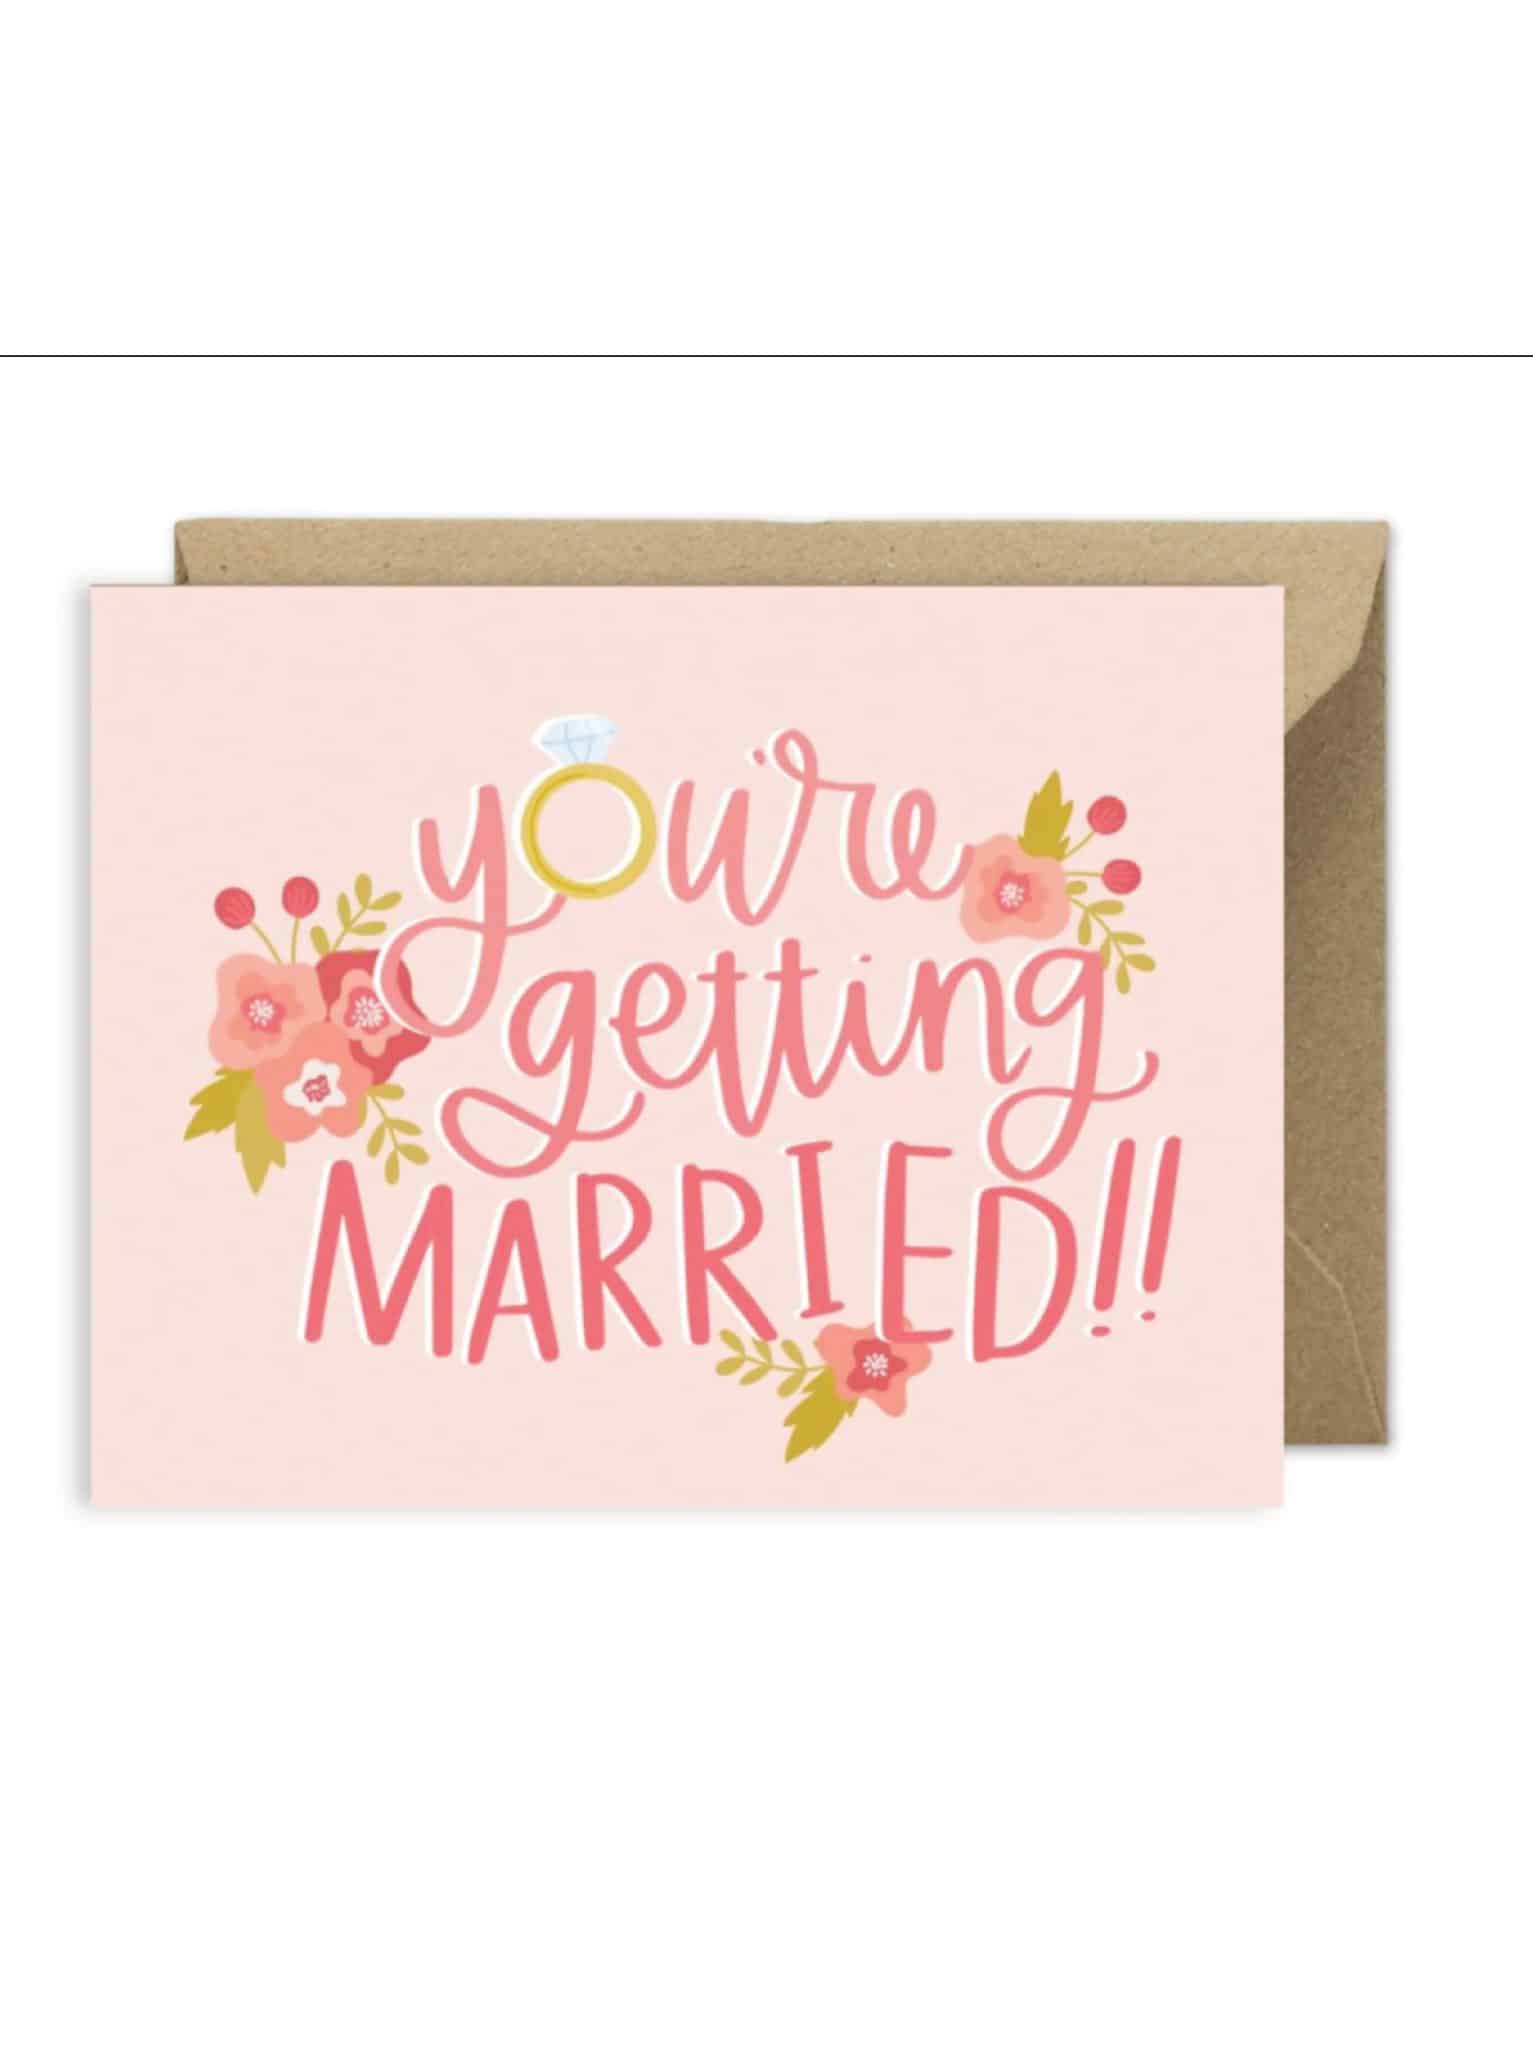 Top Wedding Gift Cards to Buy for Newlyweds | Giftcards.com